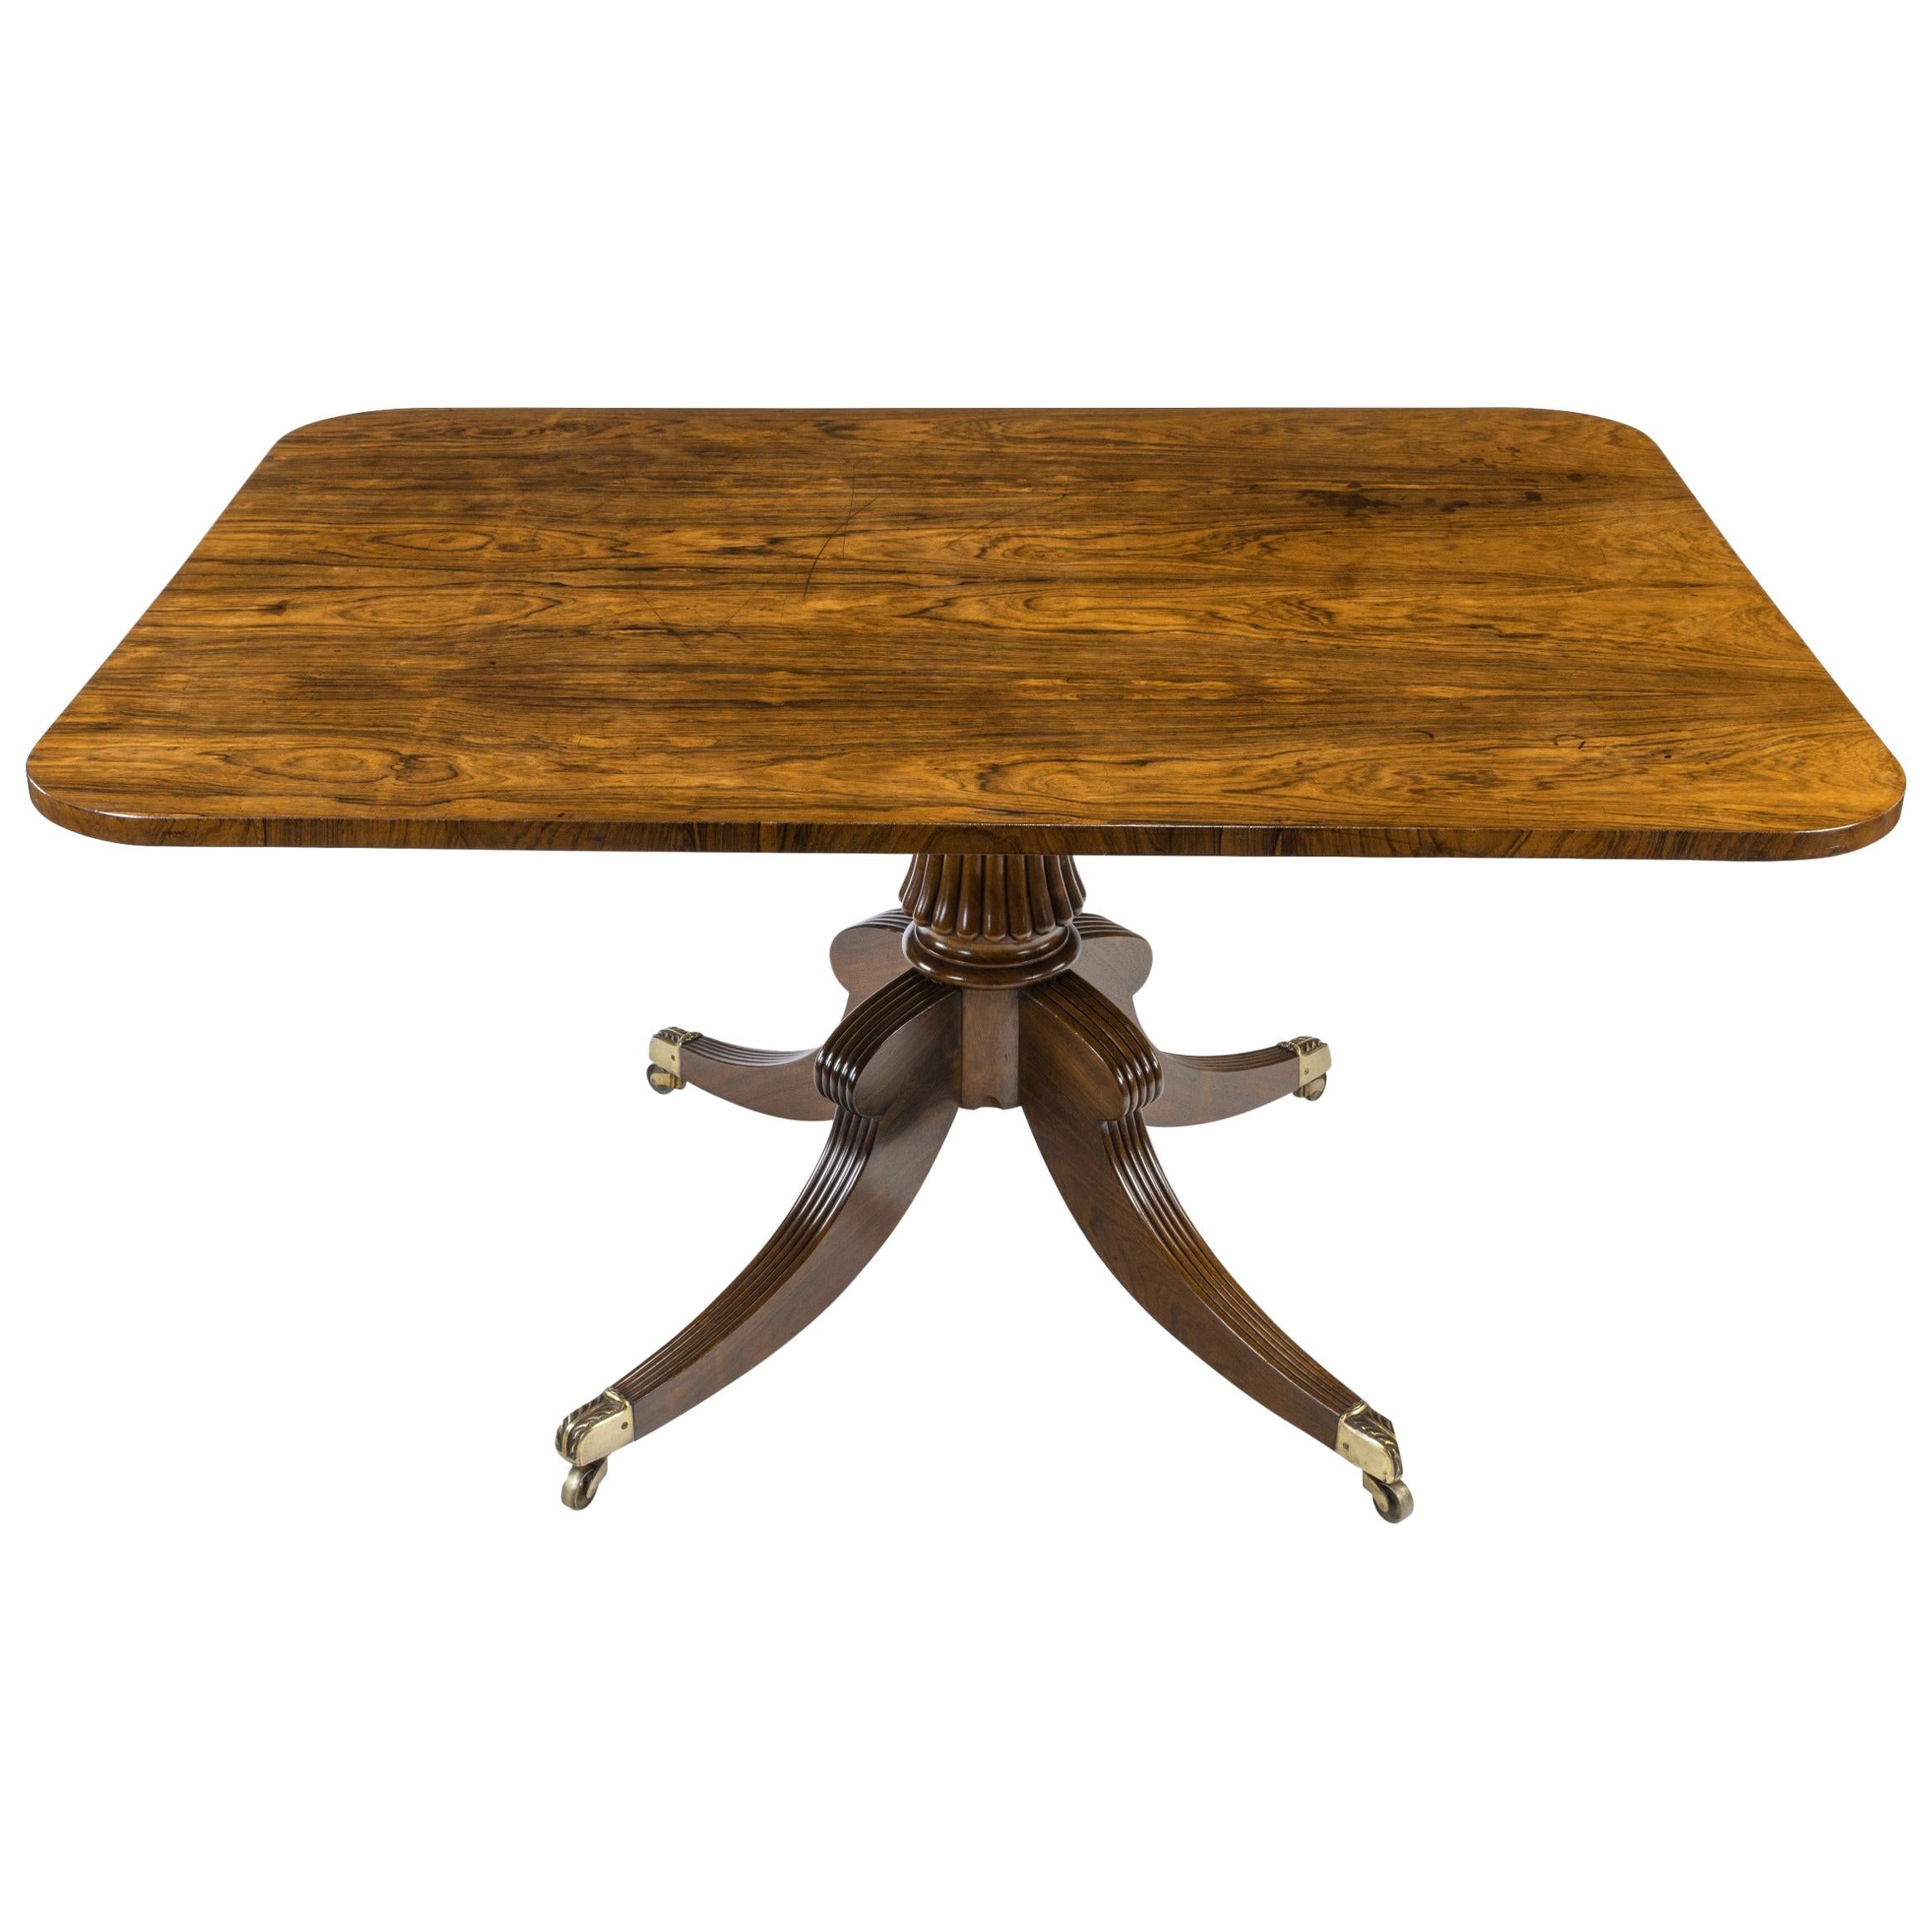 Regency Rectangular Rosewood Tilt-Top Table Attributed to Gillows